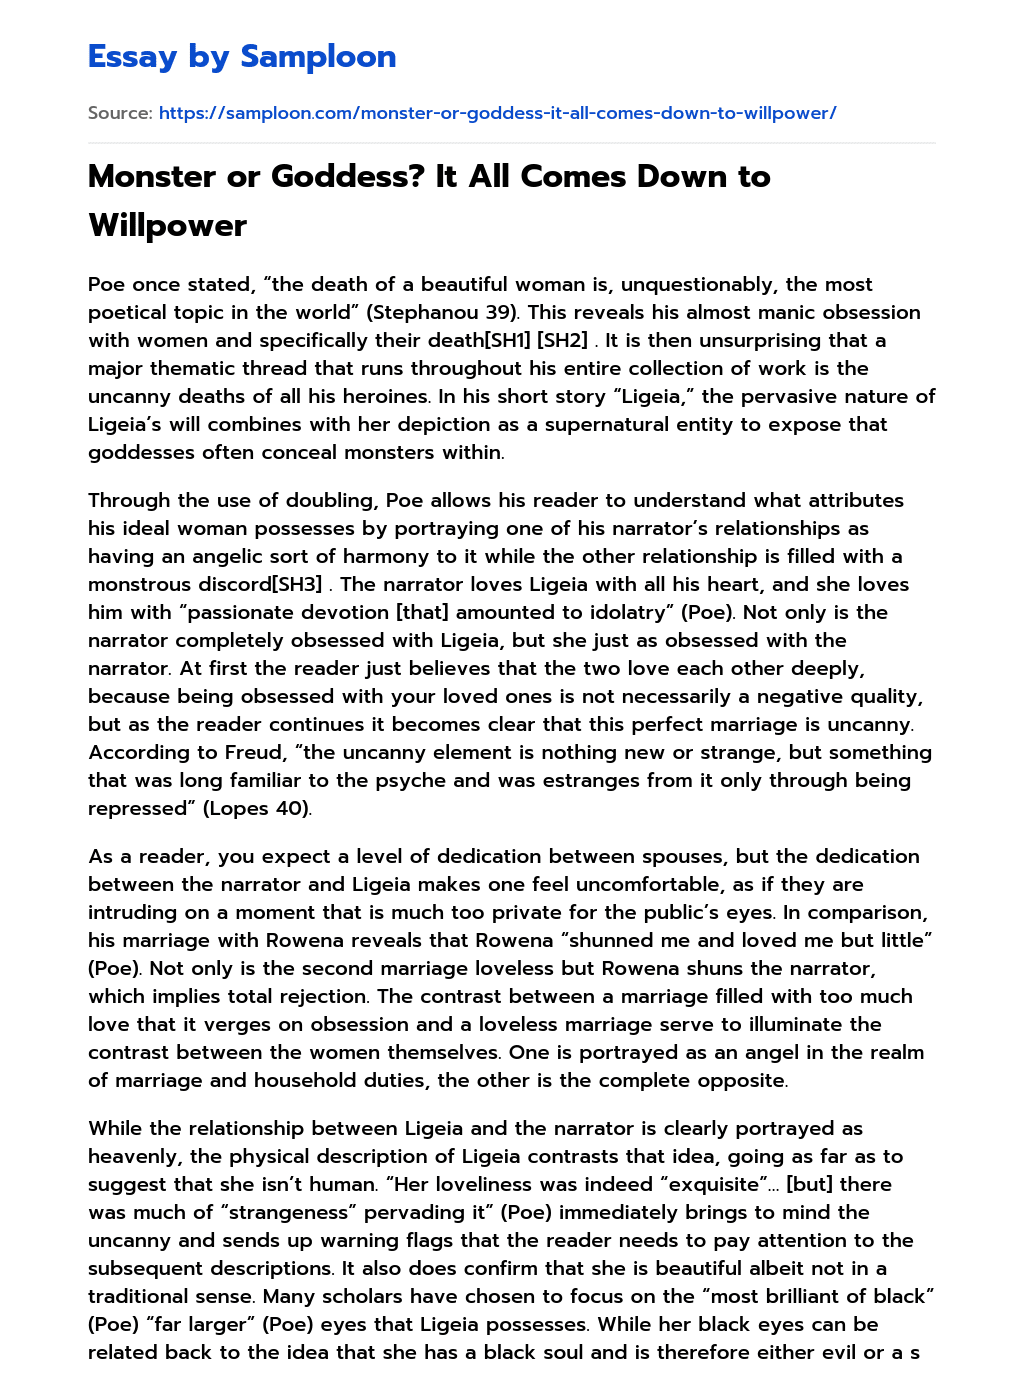 Monster or Goddess? It All Comes Down to Willpower essay